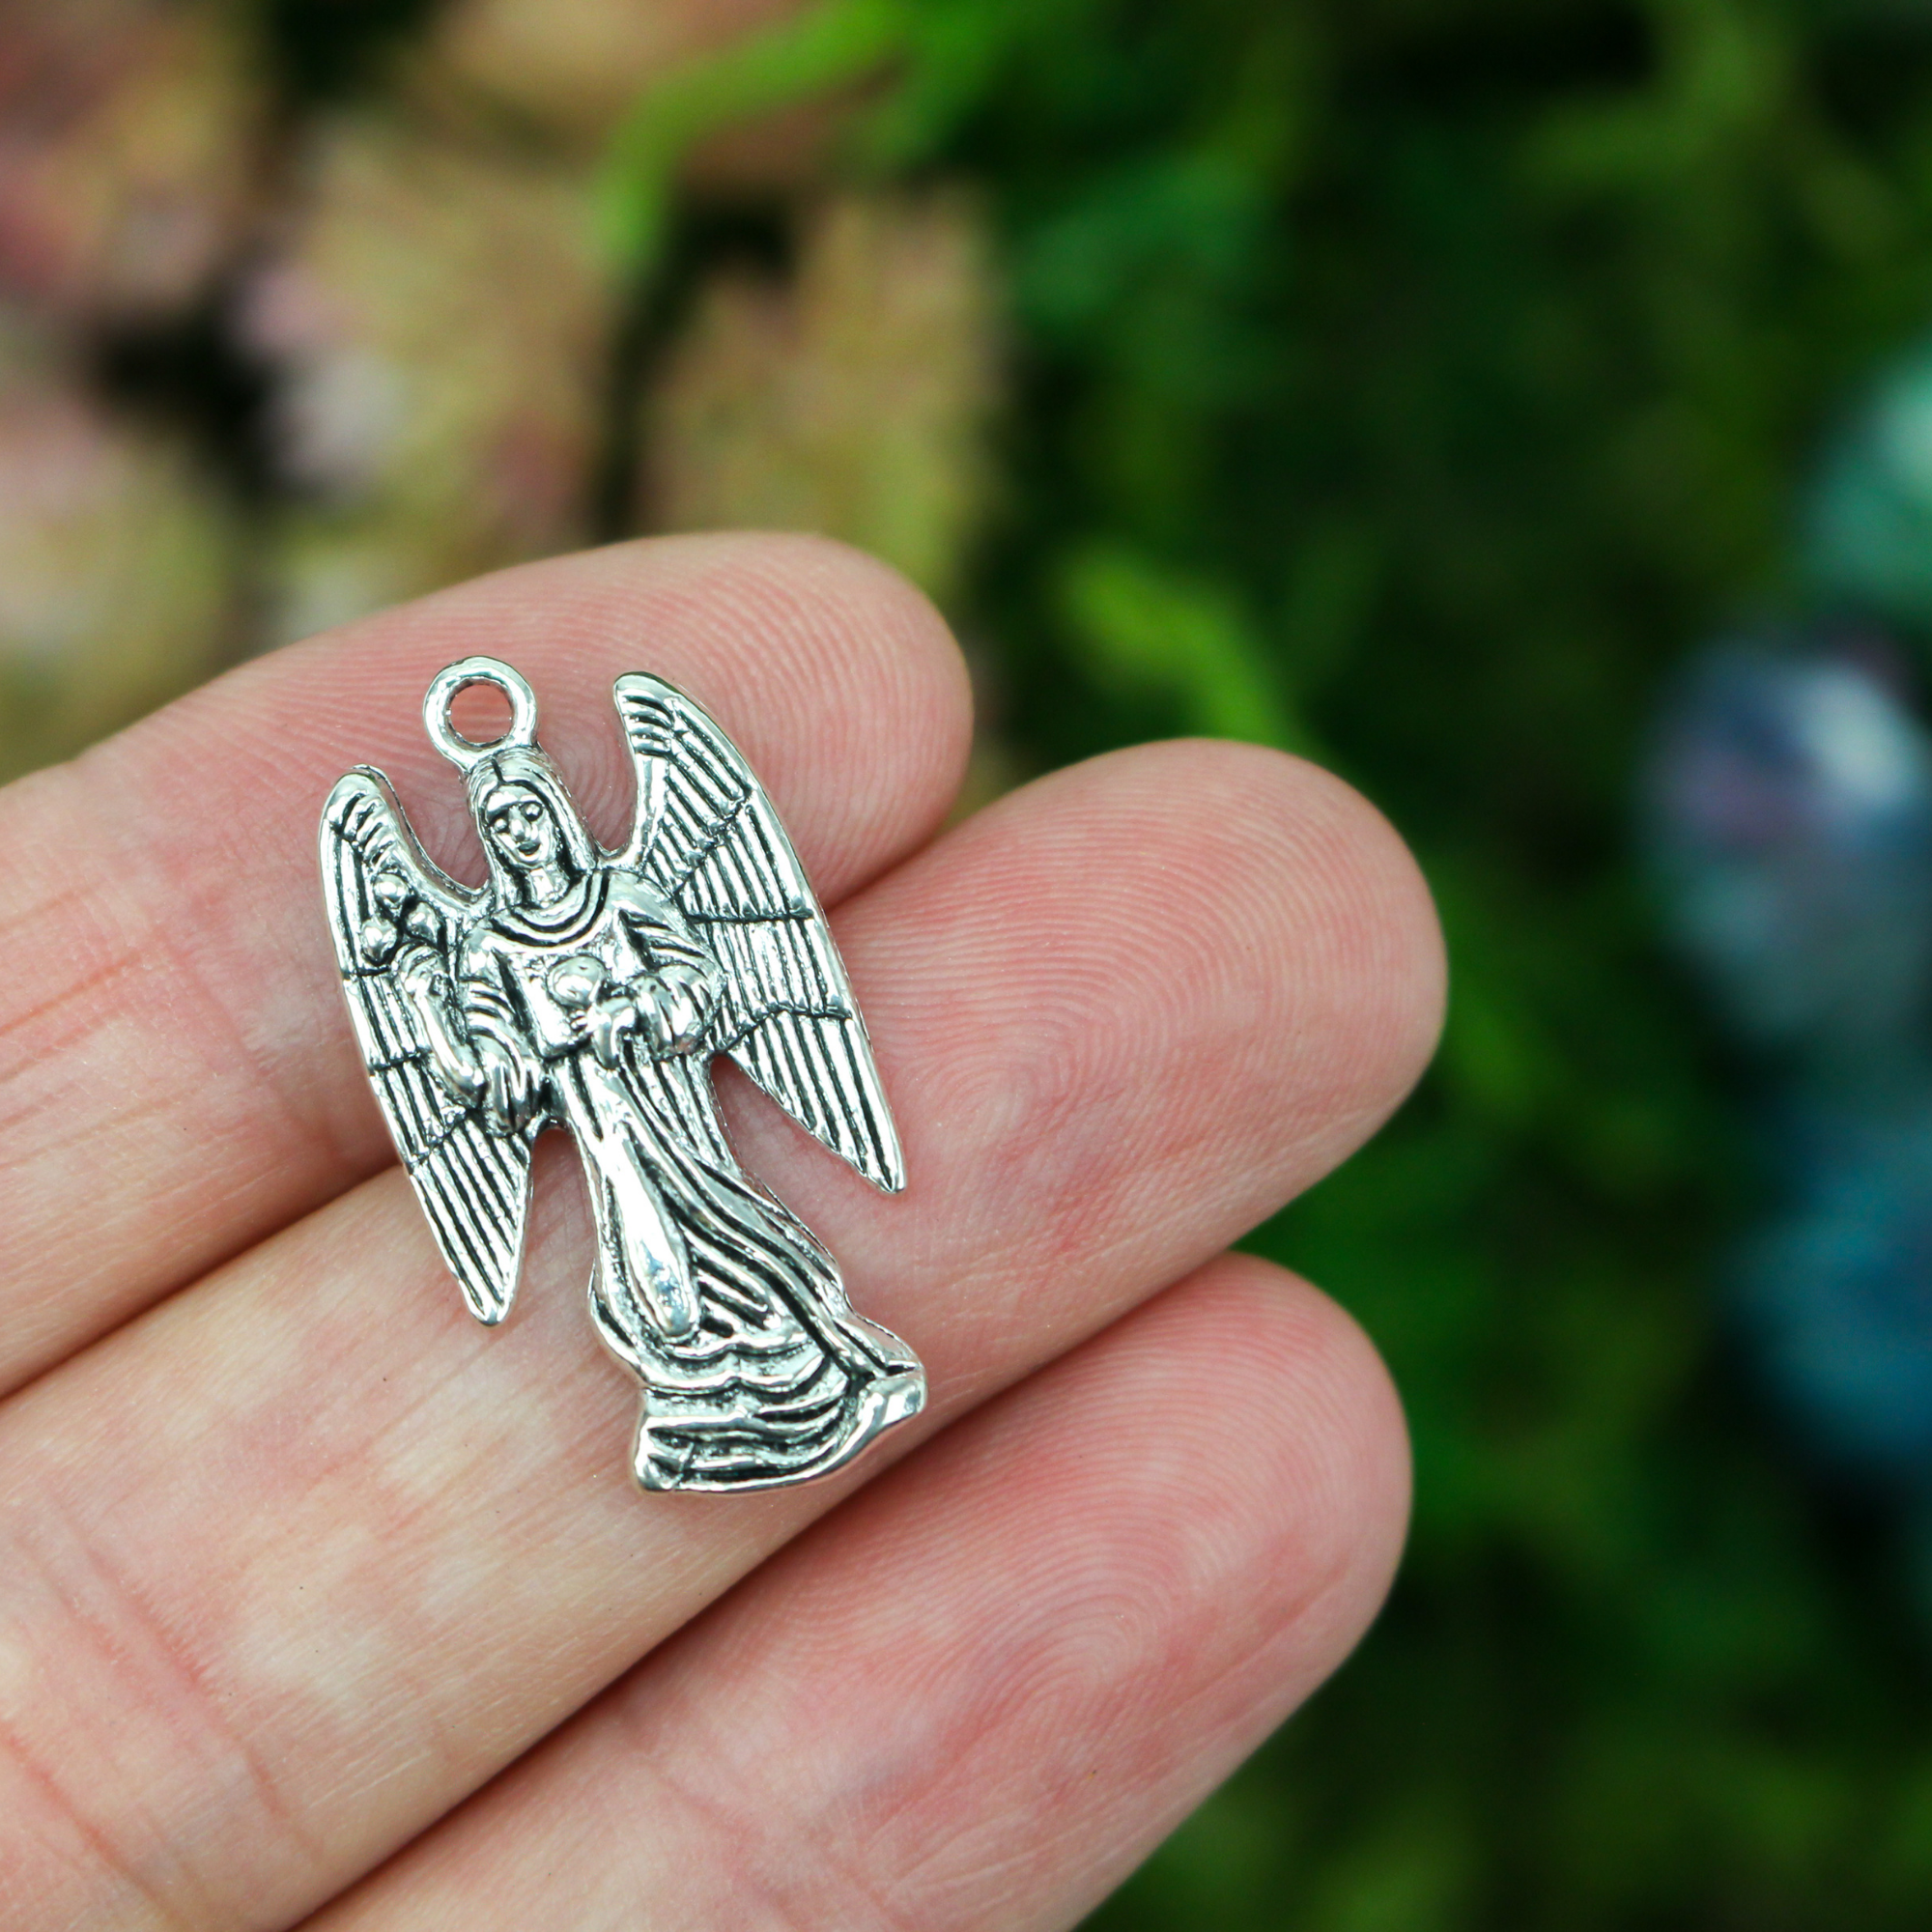 Archangel Zadkiel silver tone charm with his name on the backside inscribed in cursive